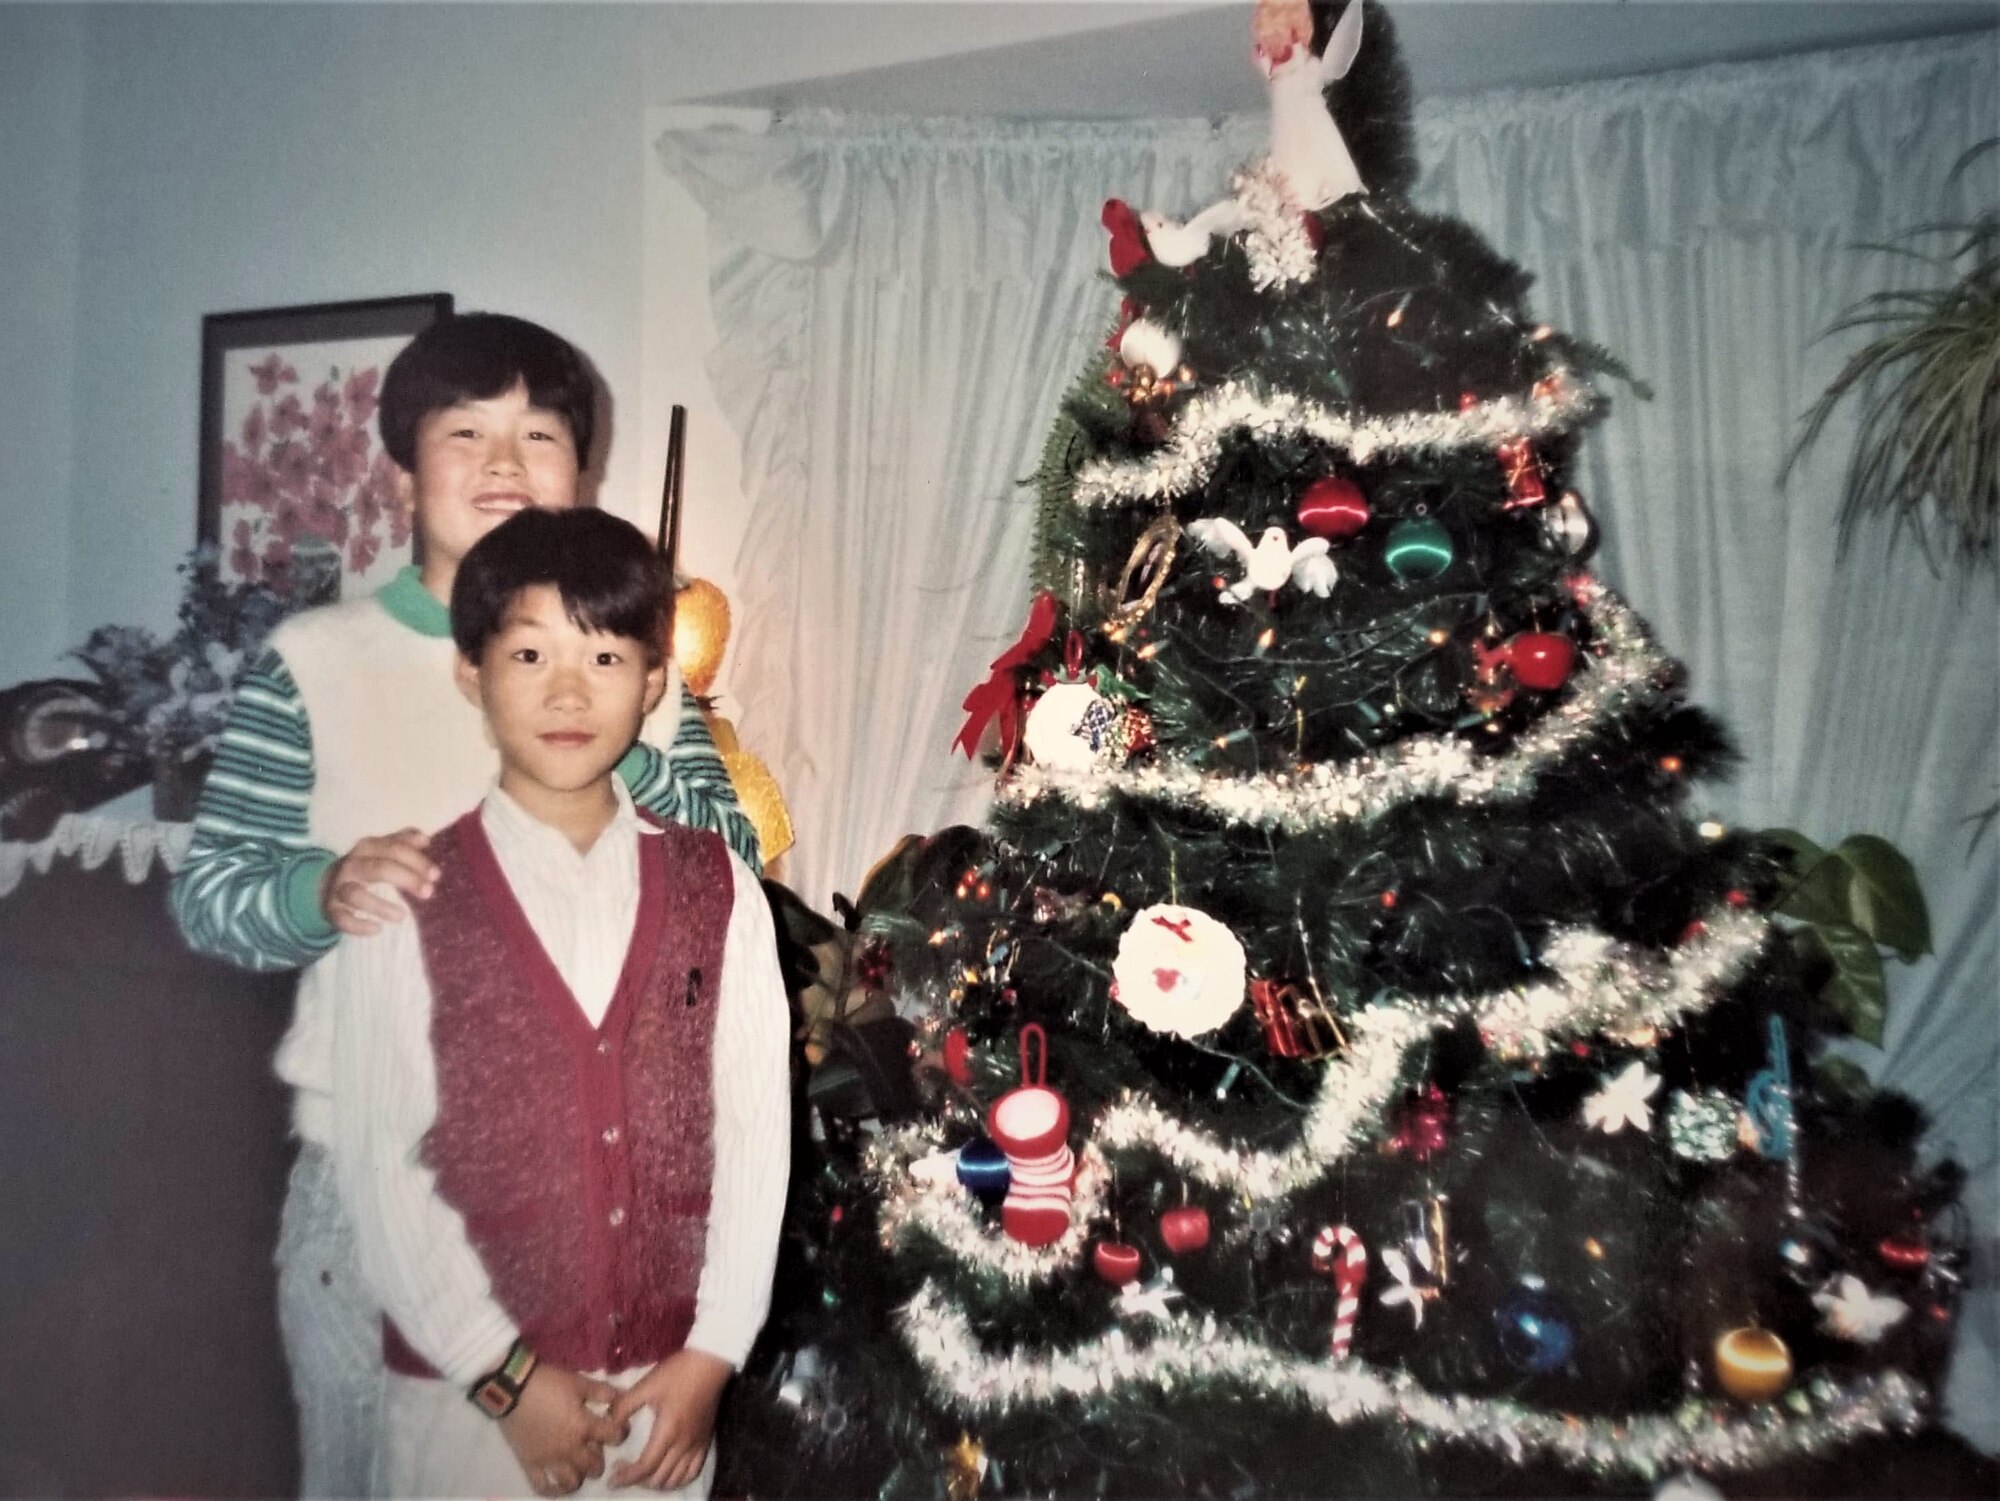 Maj. Jay Park, director of operations for Air Force Recruiting Service’s Detachment 1, with his brother Jake, celebrating their first Christmas in the United States after his parents immigrated here in 1990 to give him and his brother a better life.